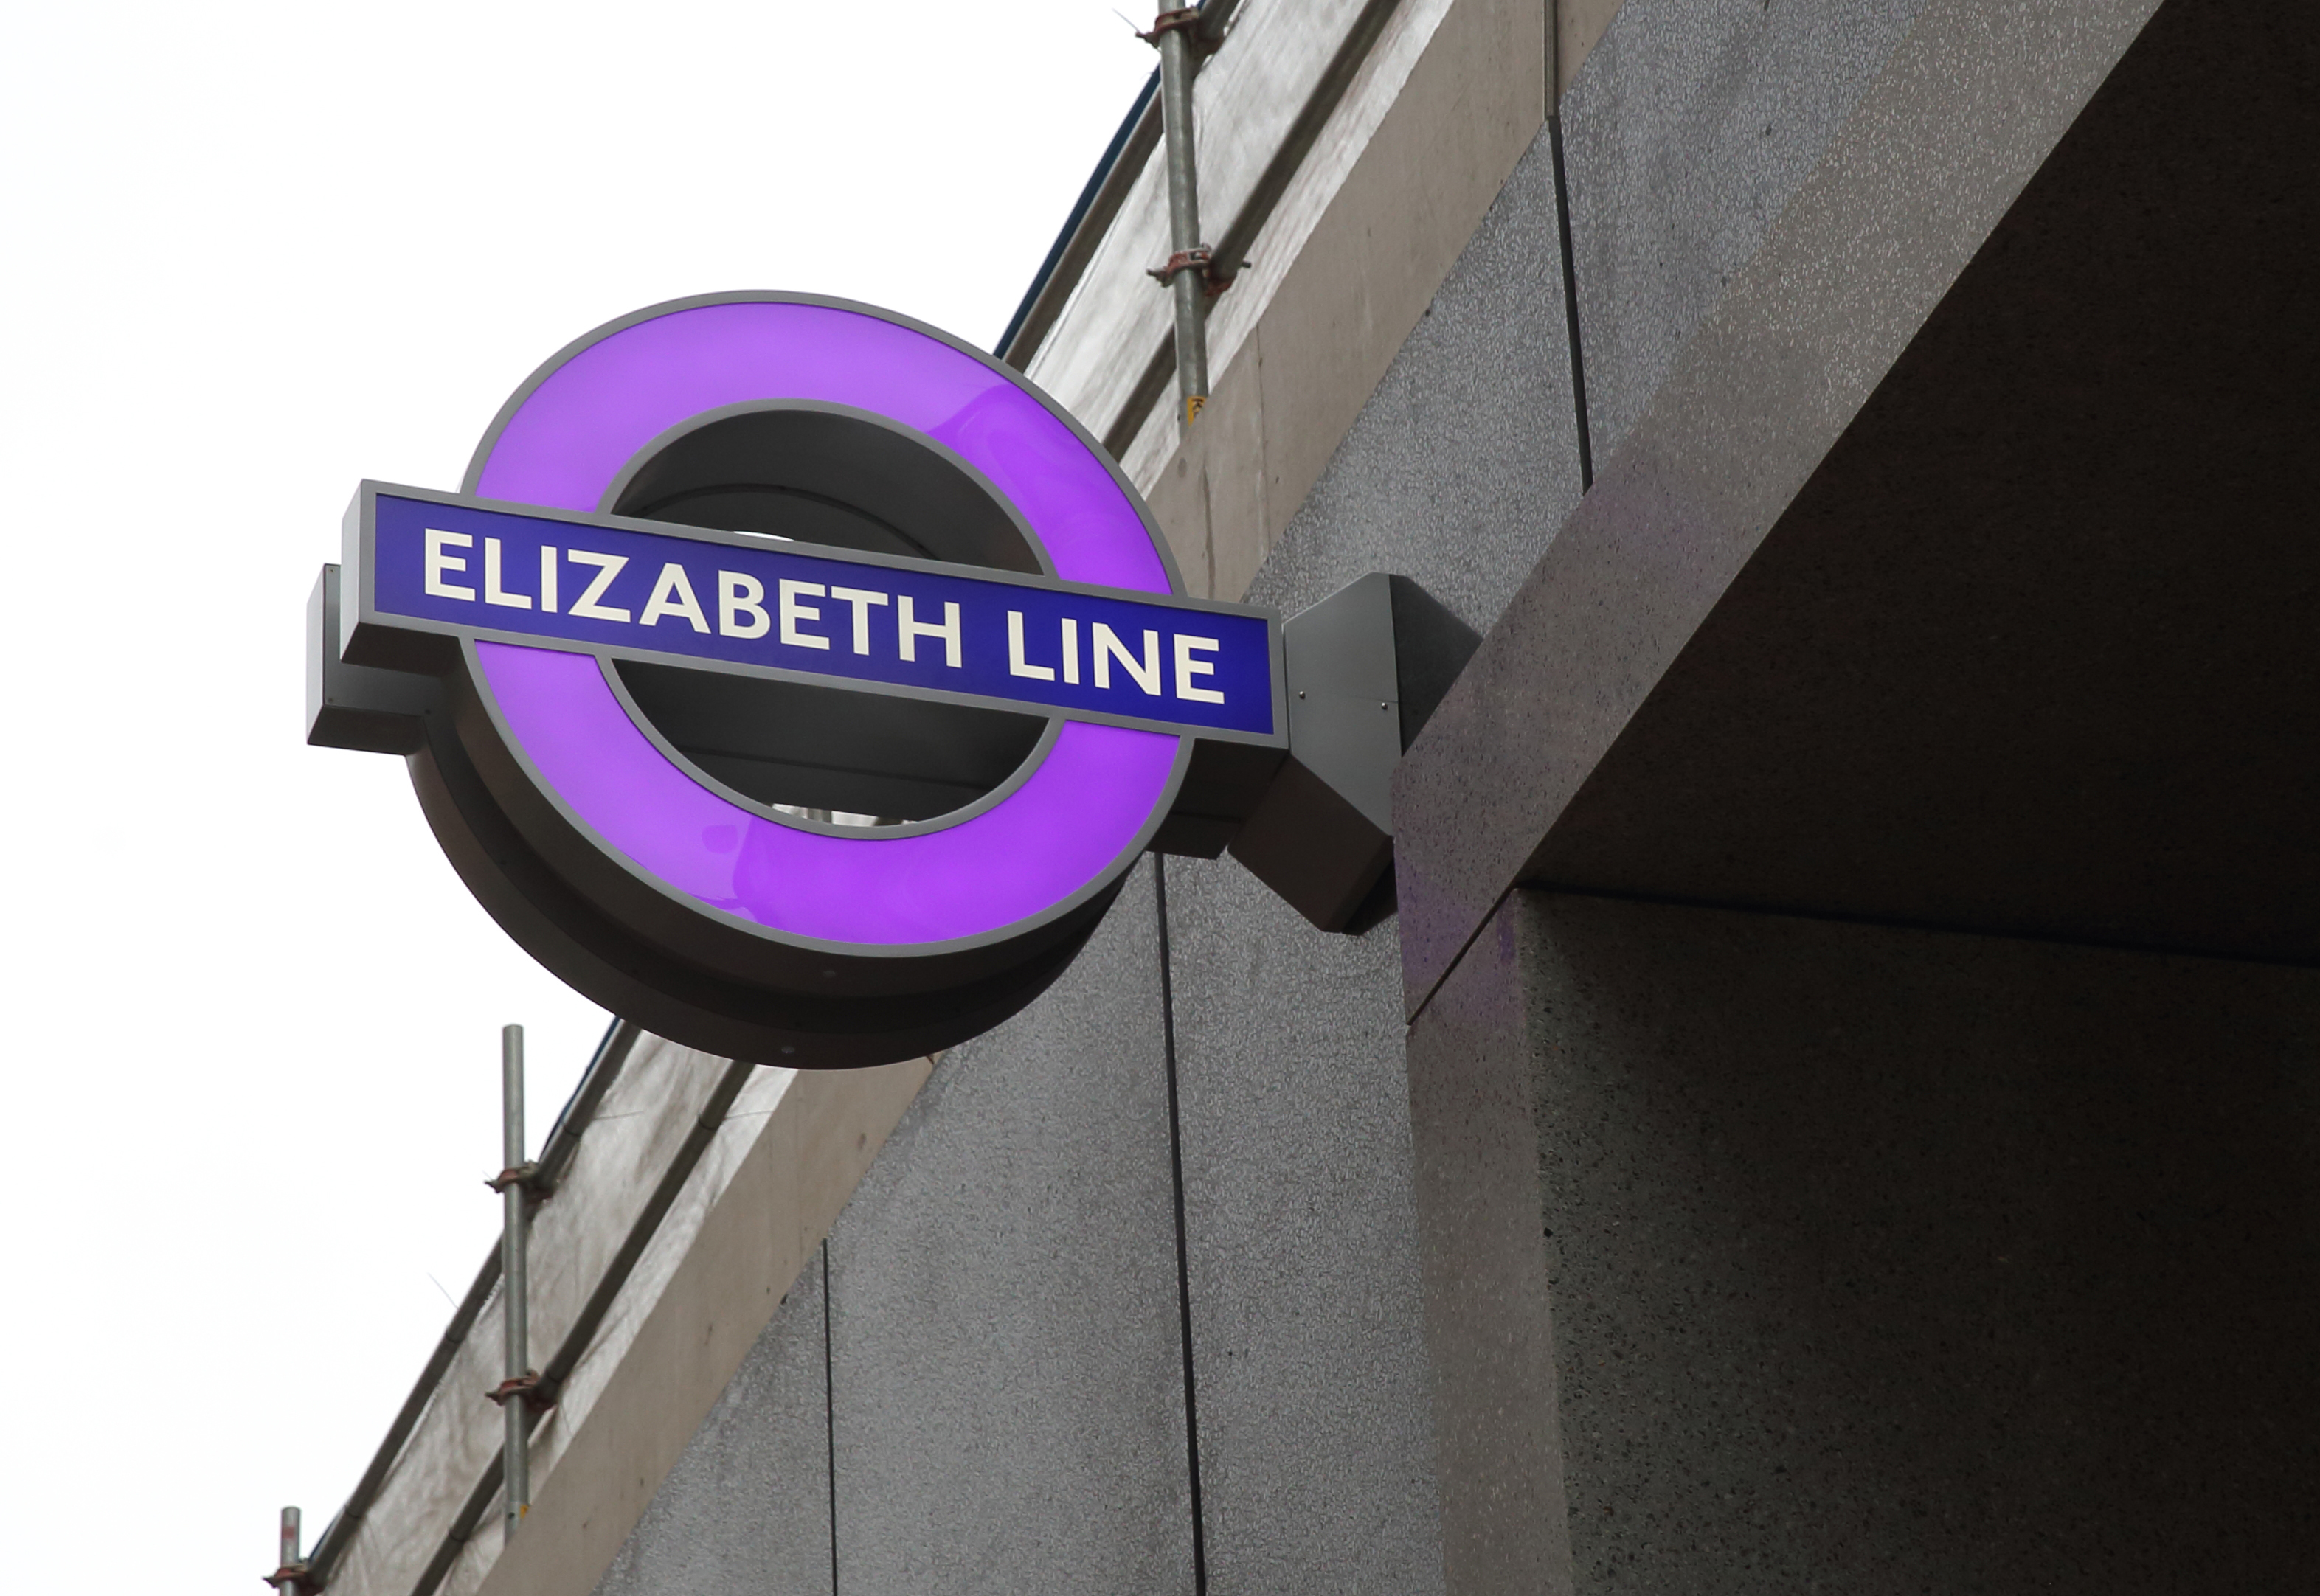 The new roundels will not be visible to the public until the Elizabeth line opens in December (Transport for London/PA)